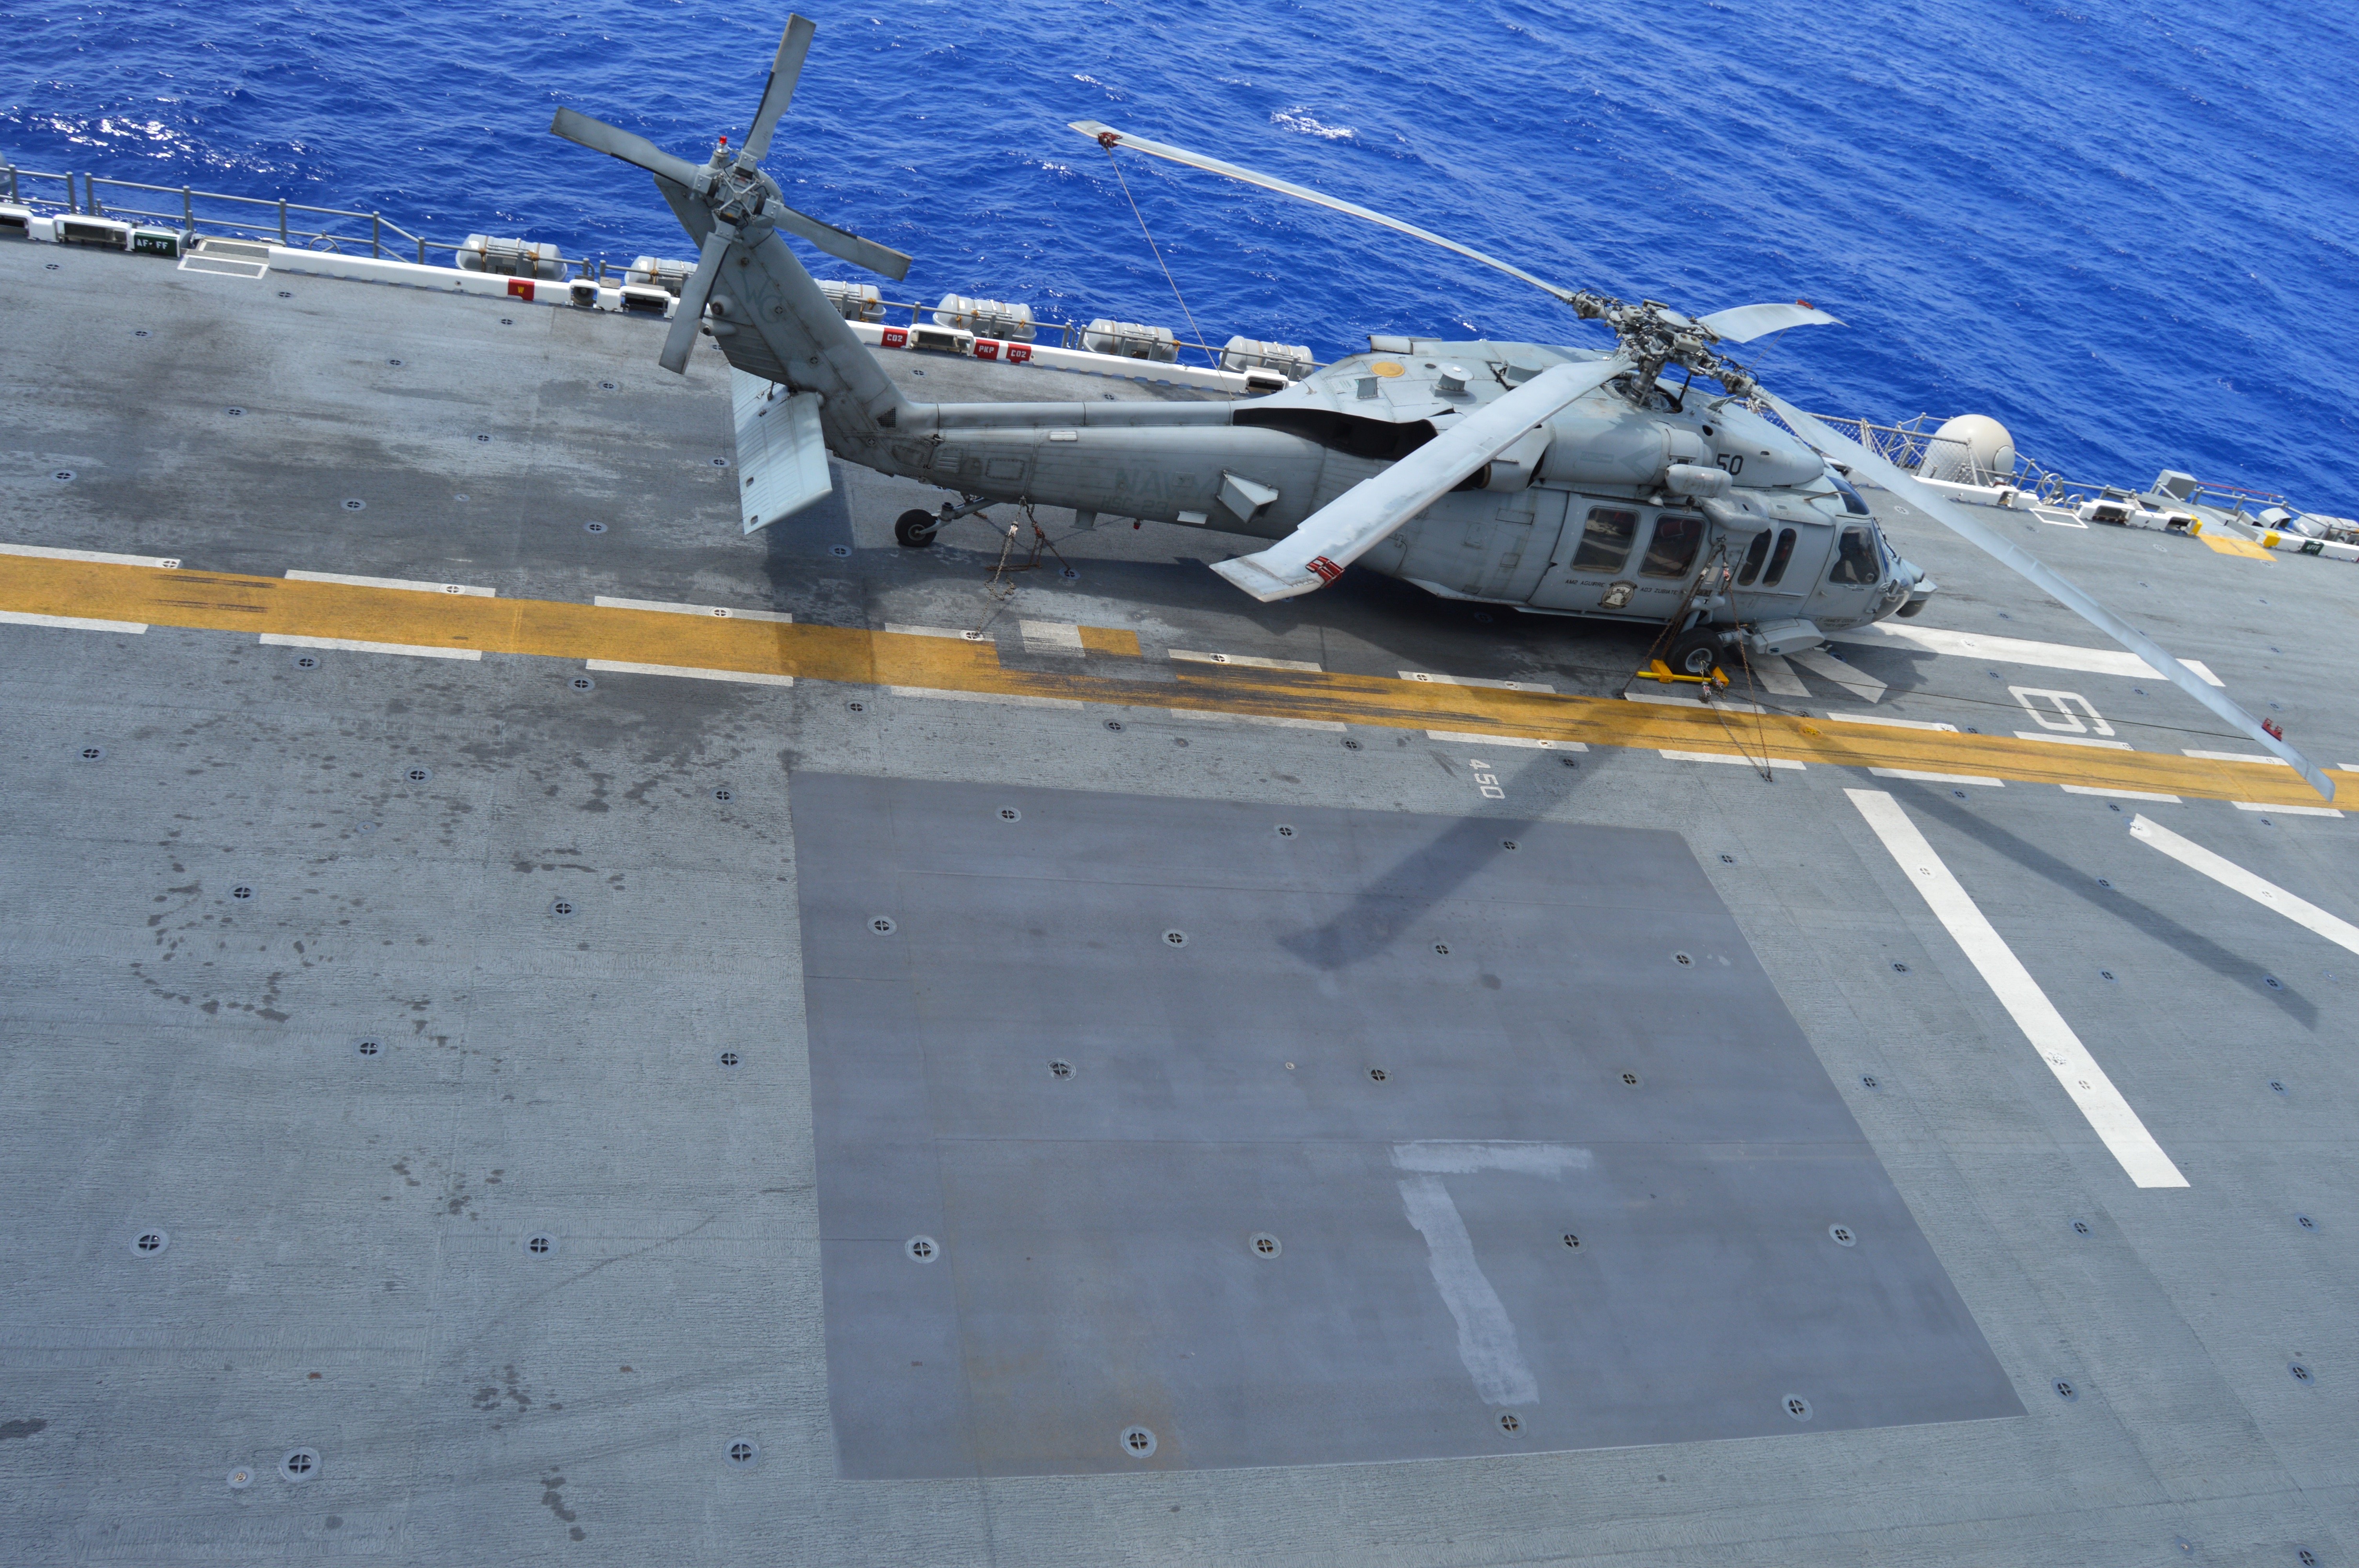 When the flight deck of USS America was redone to support F-35B operations, patches of advanced non-skid material were added to allow the MV-22 Osprey to land in more spots on the deck without causing damage with its extreme heat and wind while landing vertically. USNI News photo.